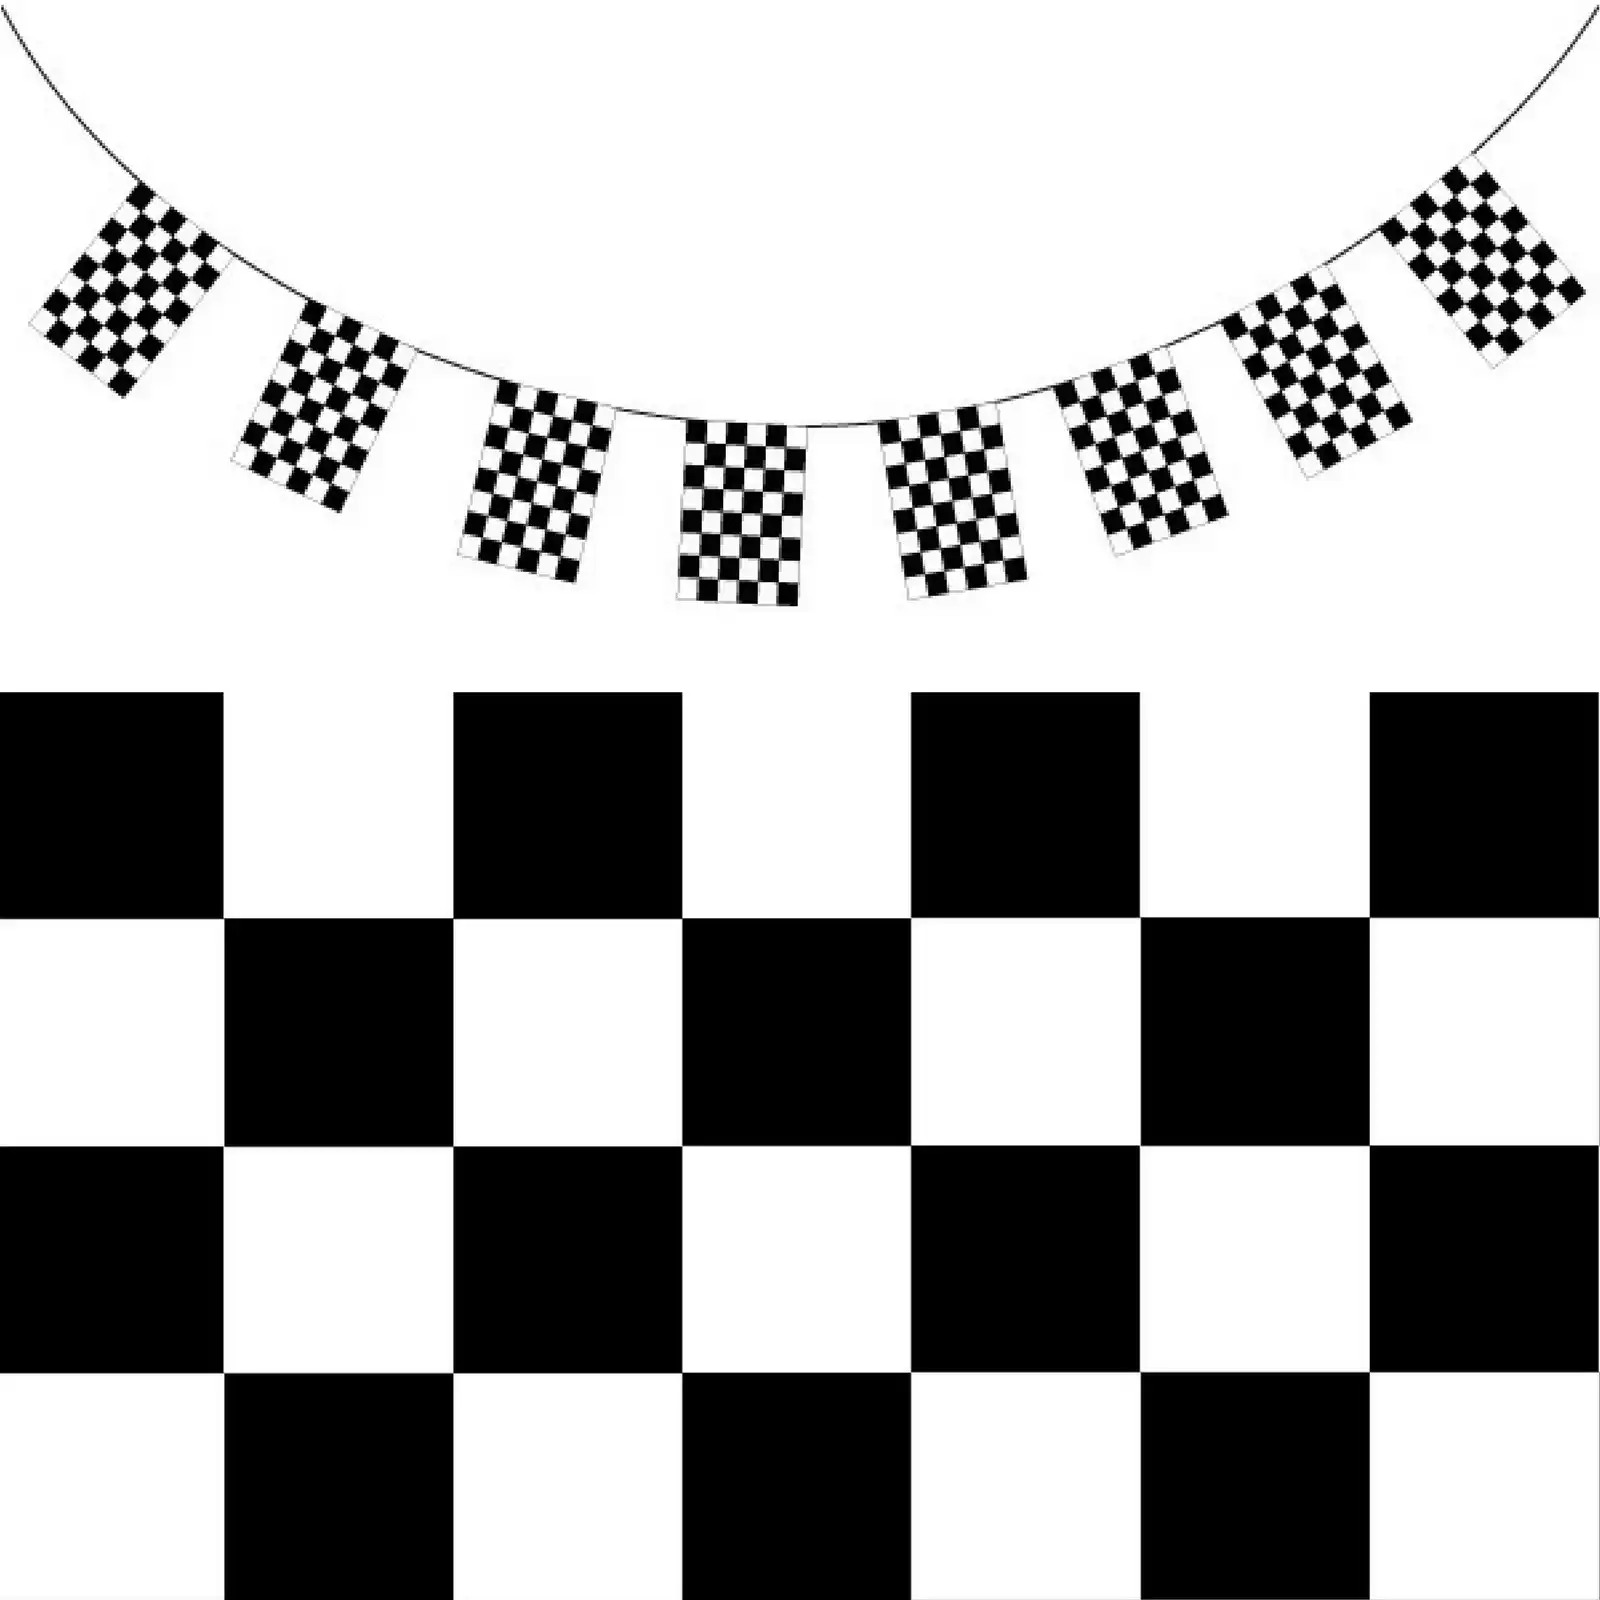 CHECKERED BUNTING FLAG Race Car Chequered Flag Banner Hanging Decoration Rectangular